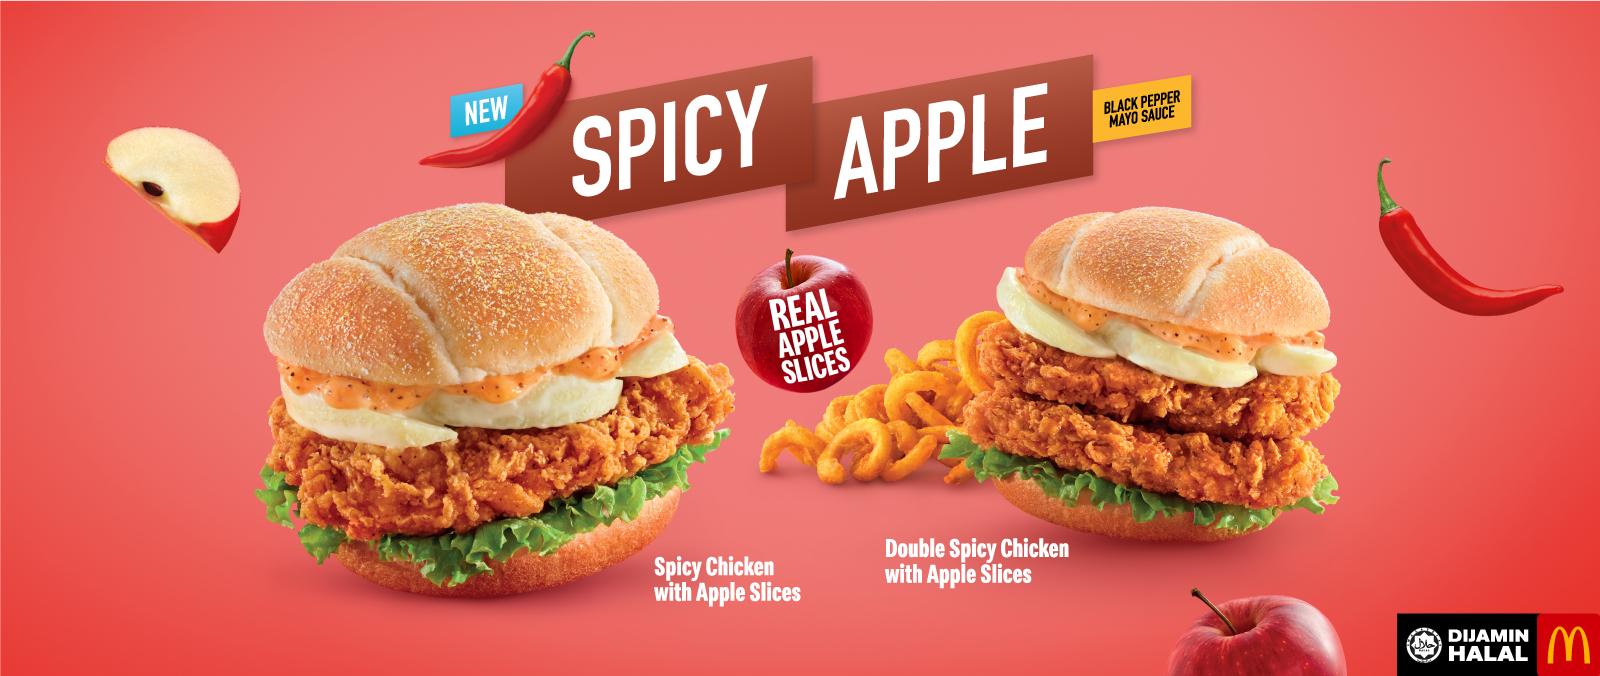 Spicy Chicken with Apple Slices's image'